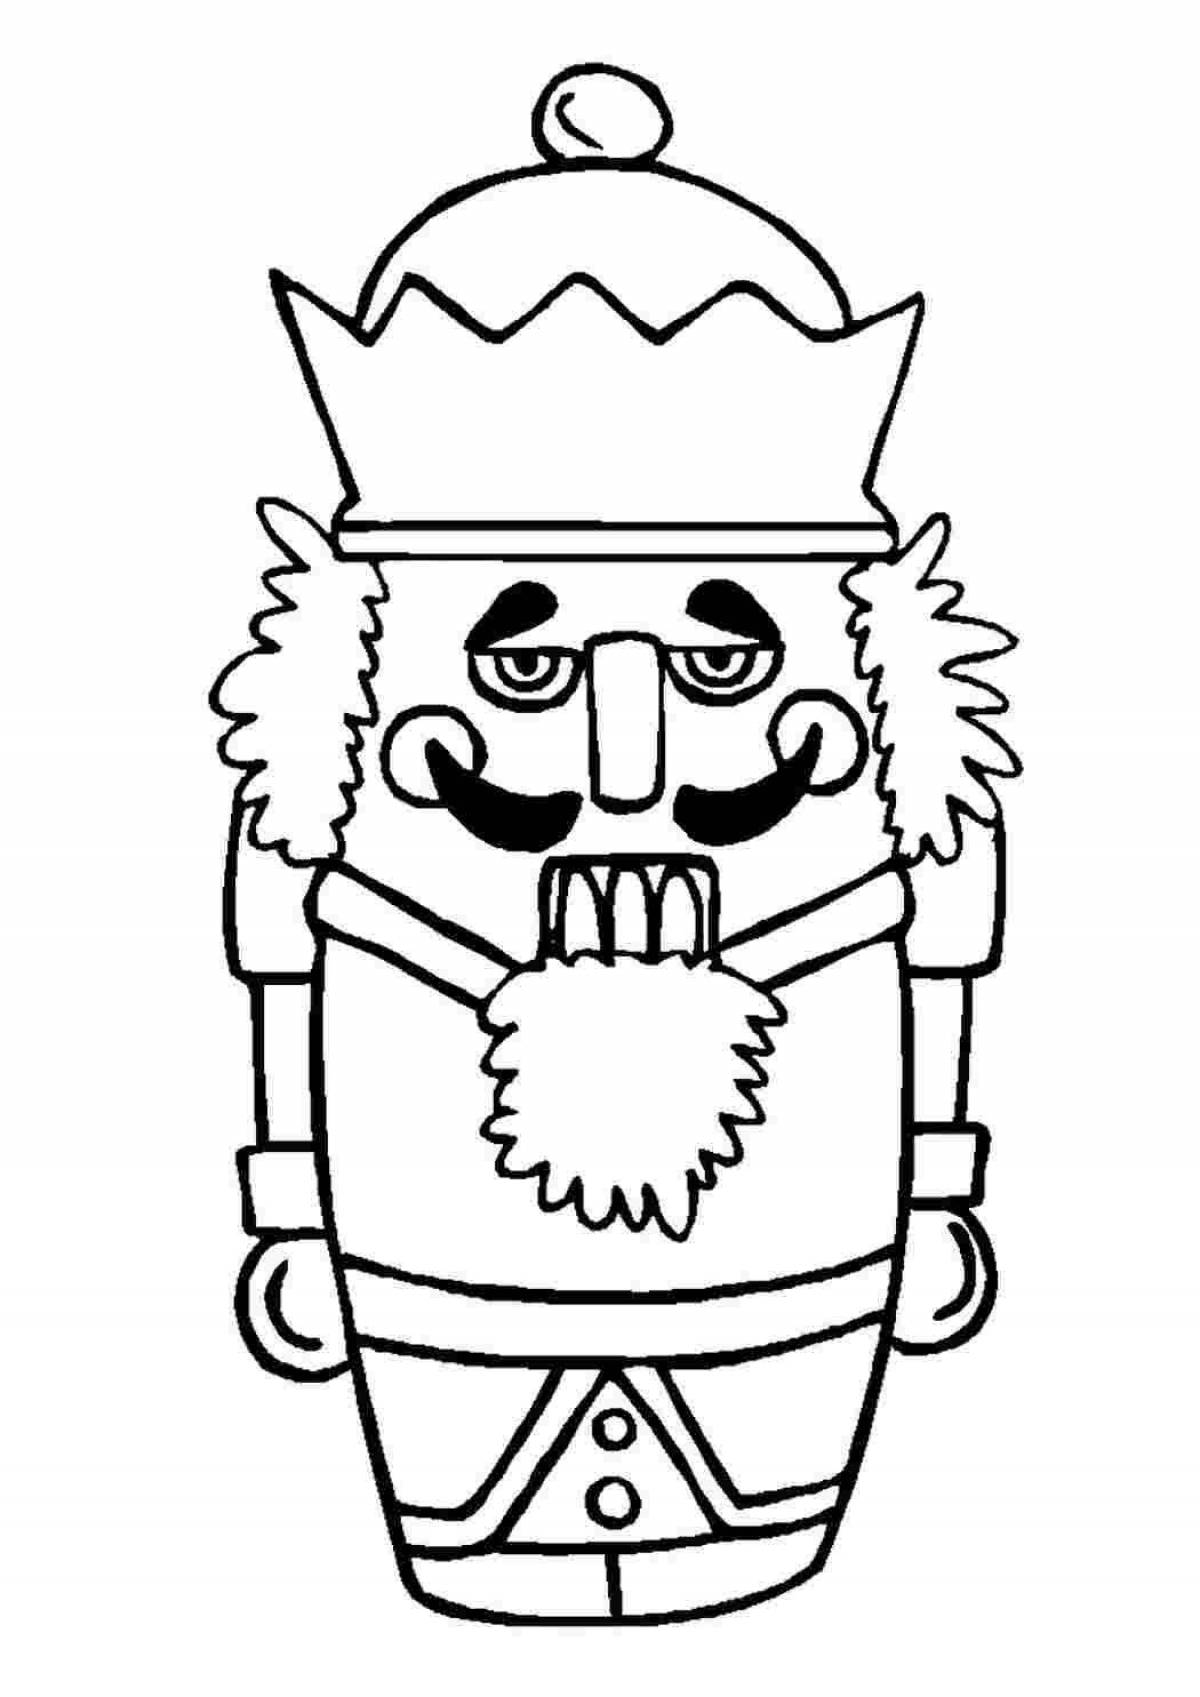 Adorable Nutcracker coloring page for kids